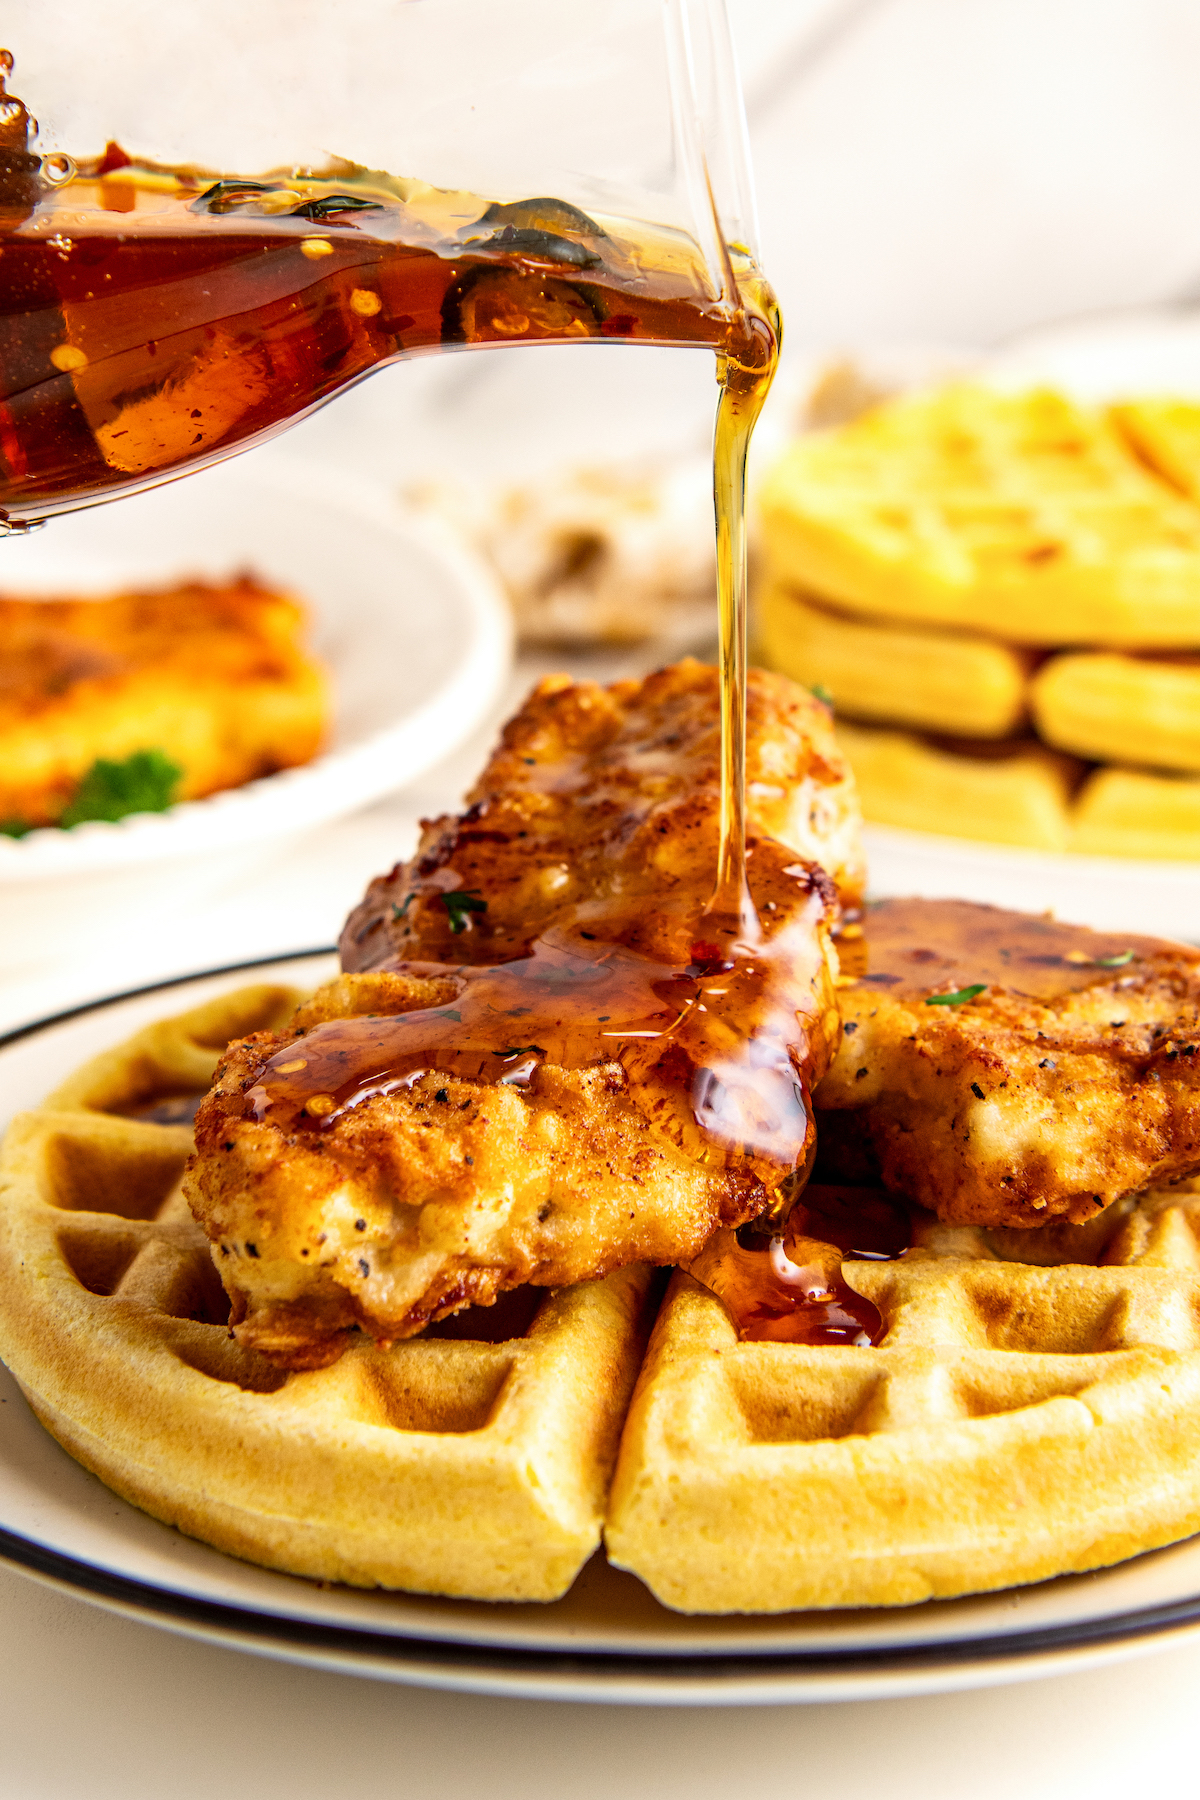 Pouring hot honey over the Southern chicken with waffles.